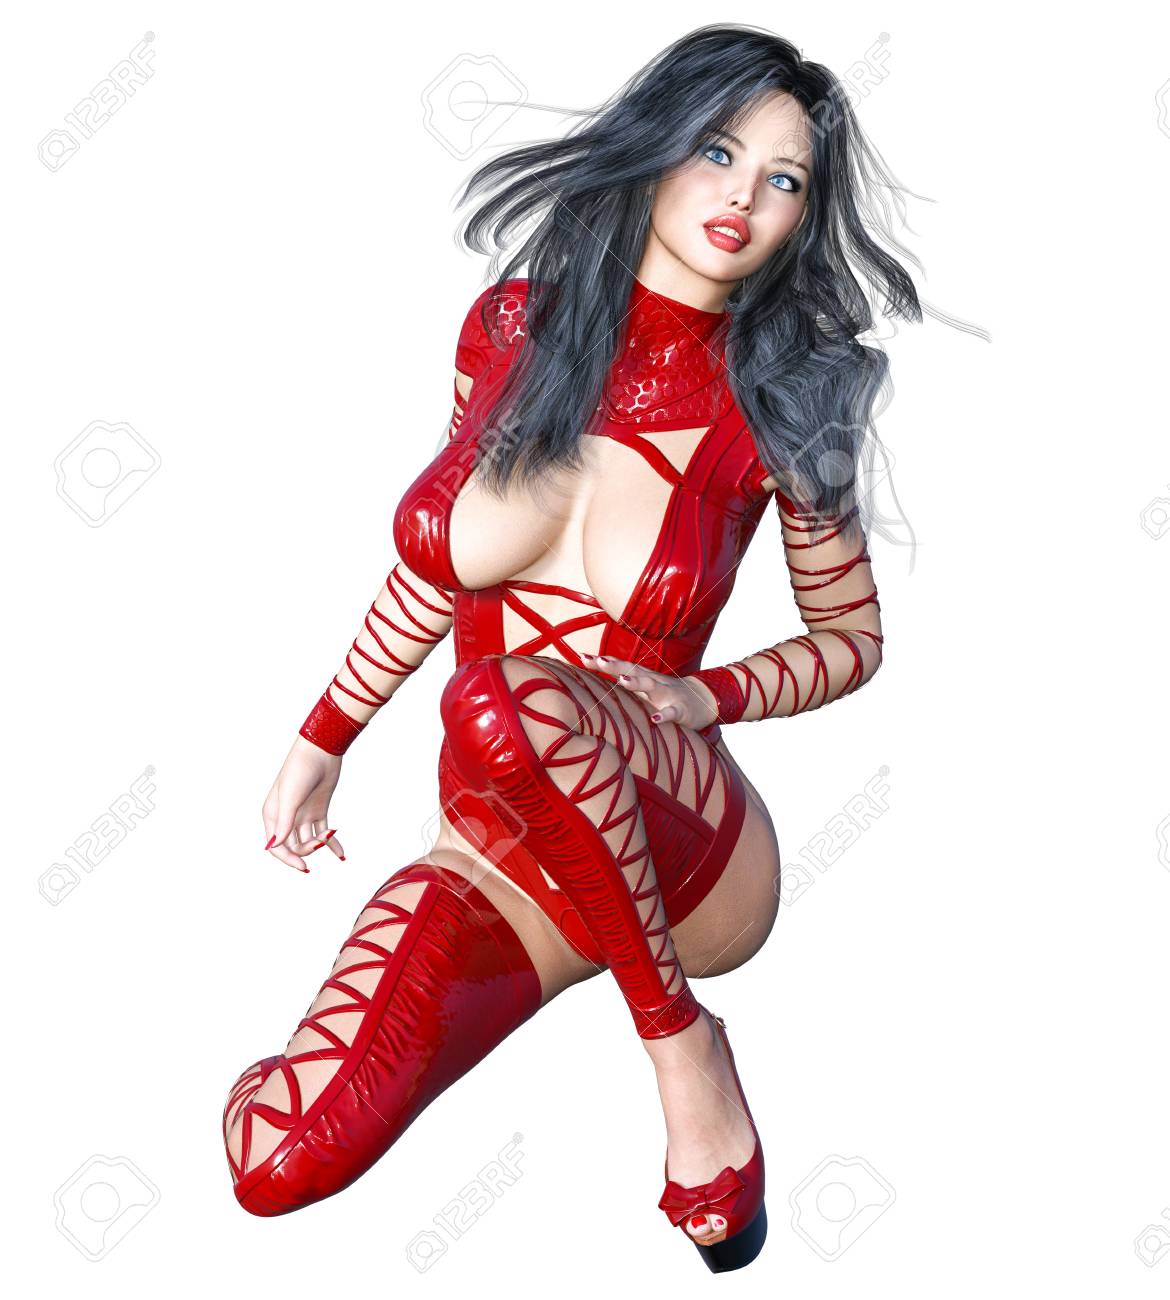 Red Latex Lingerie photo 16